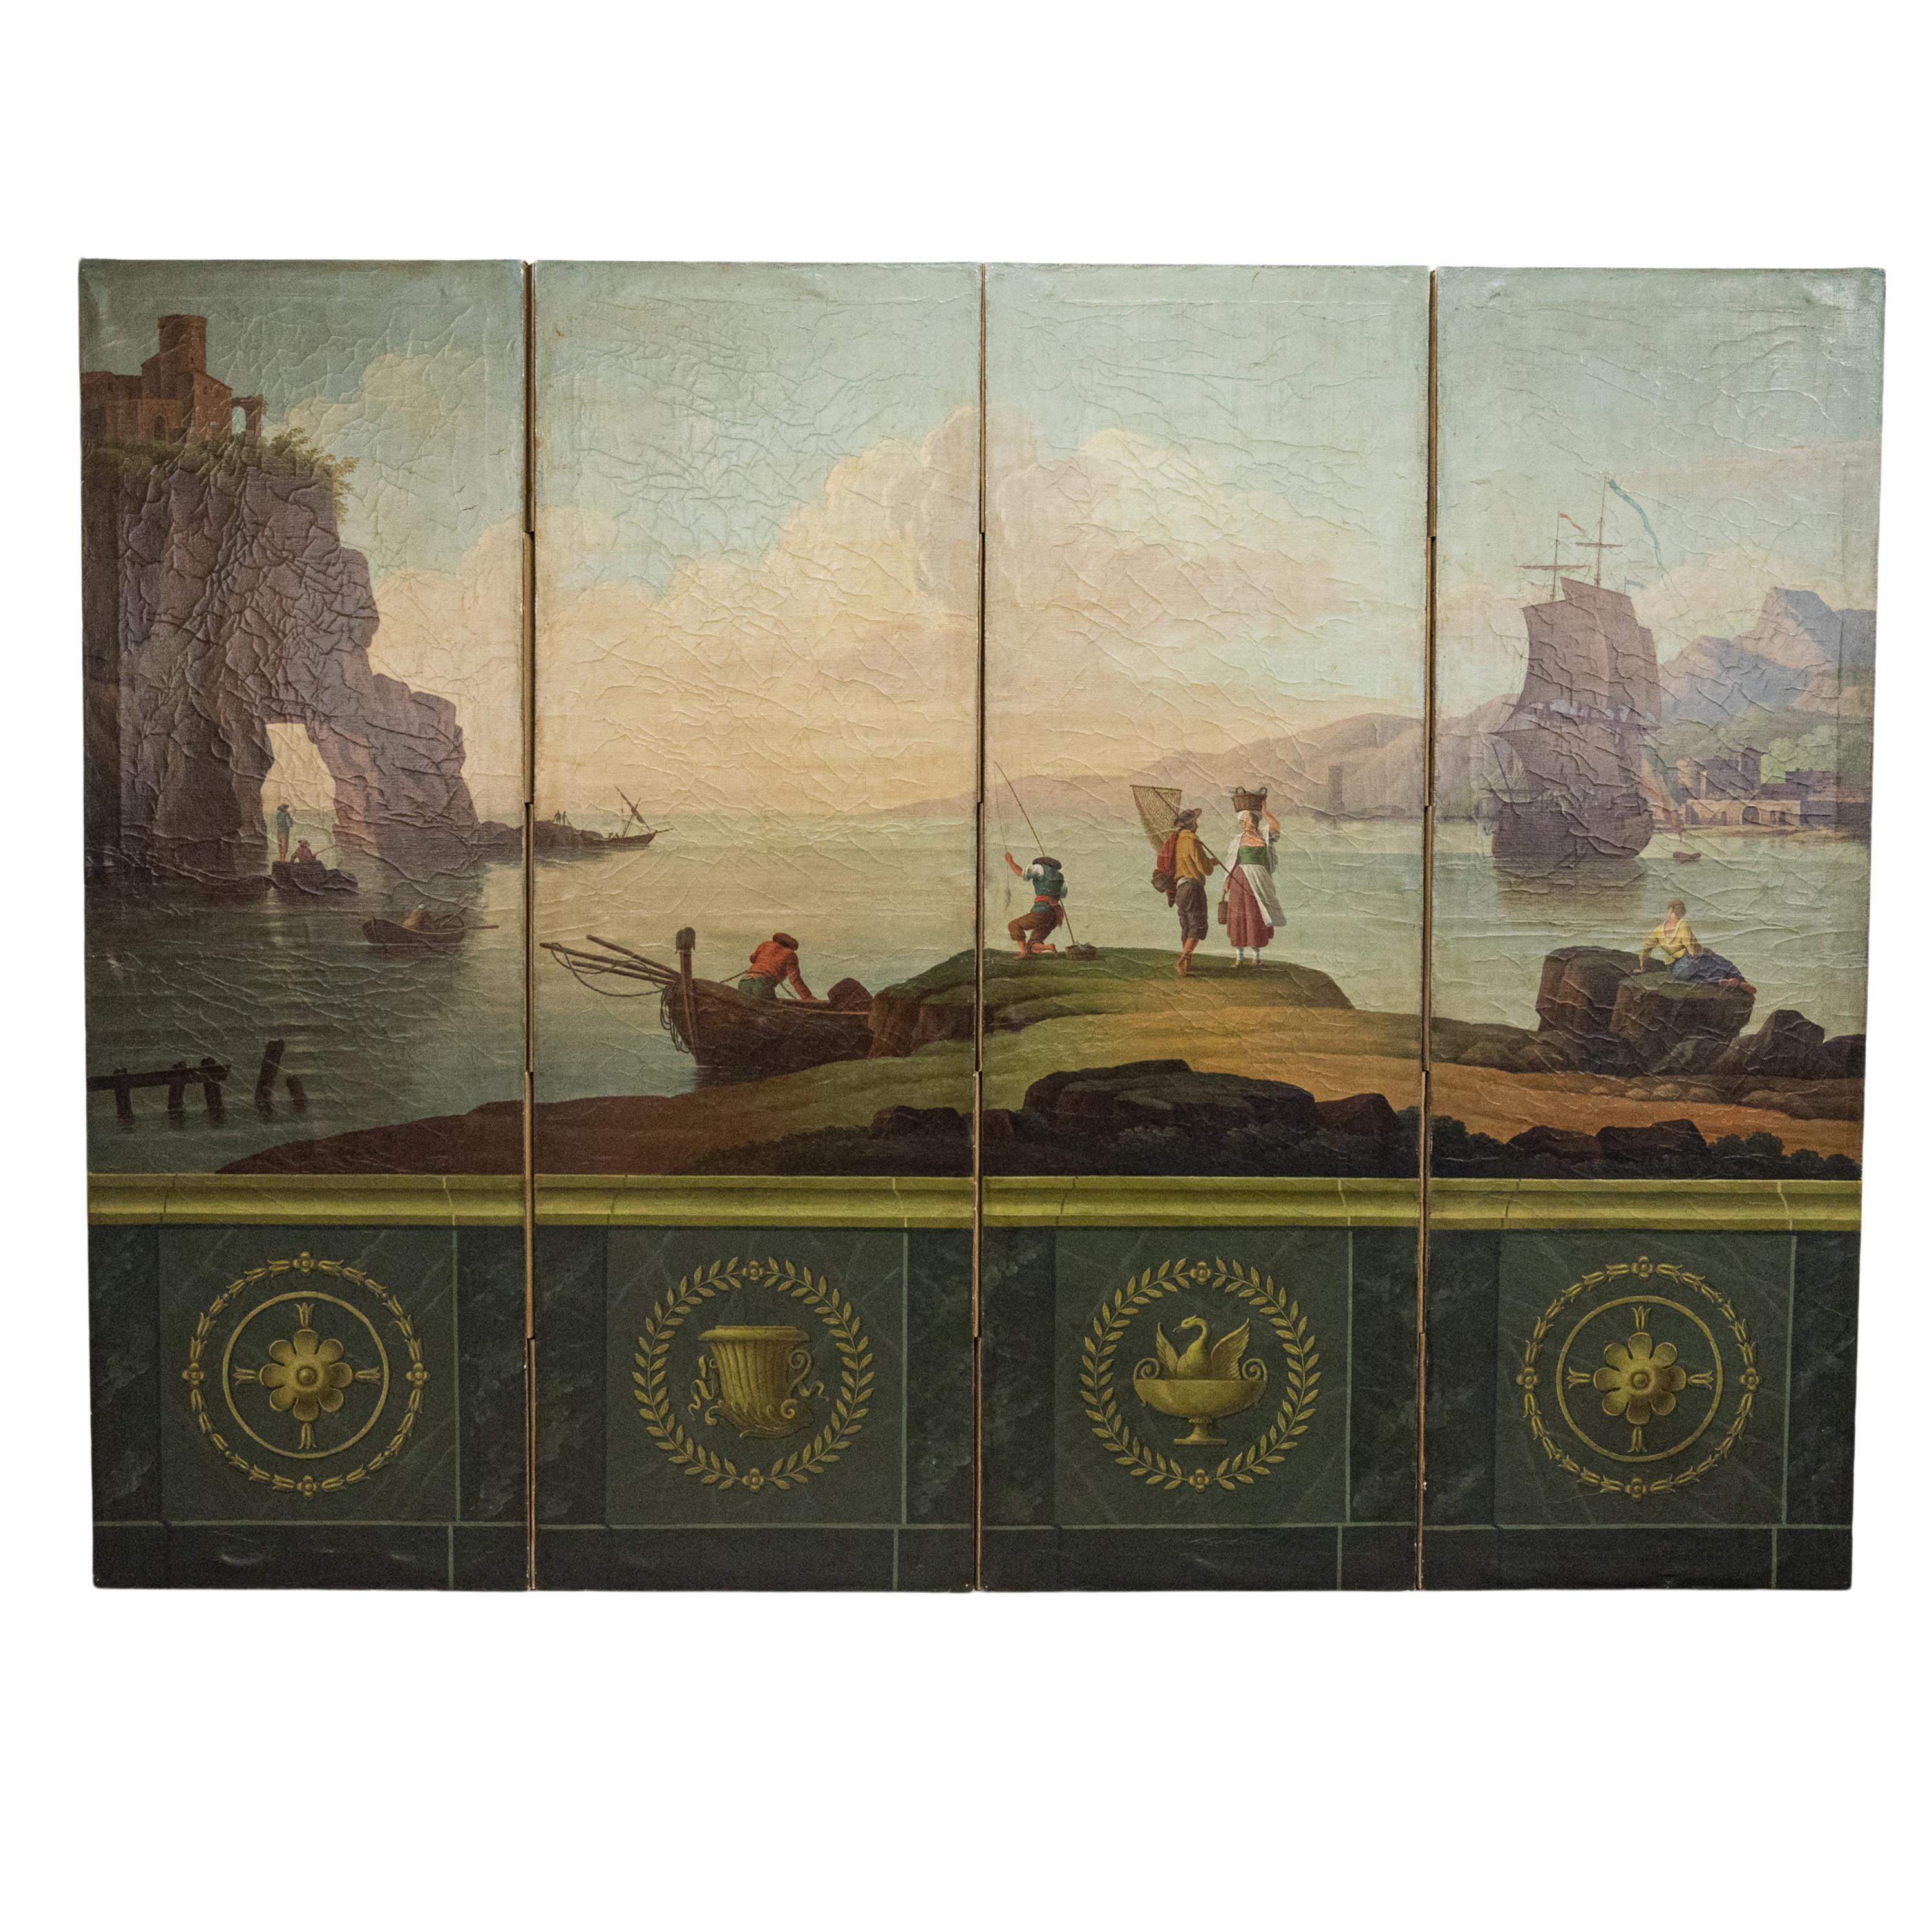 A very fine, spectacular antique Italian oil on canvas screen/room divider, circa 1860.
The four fold screen is very finely painted with an Italian fishing/harbor scene, the base is painted with Trompe L'oeil tiles having Neoclassical devices at